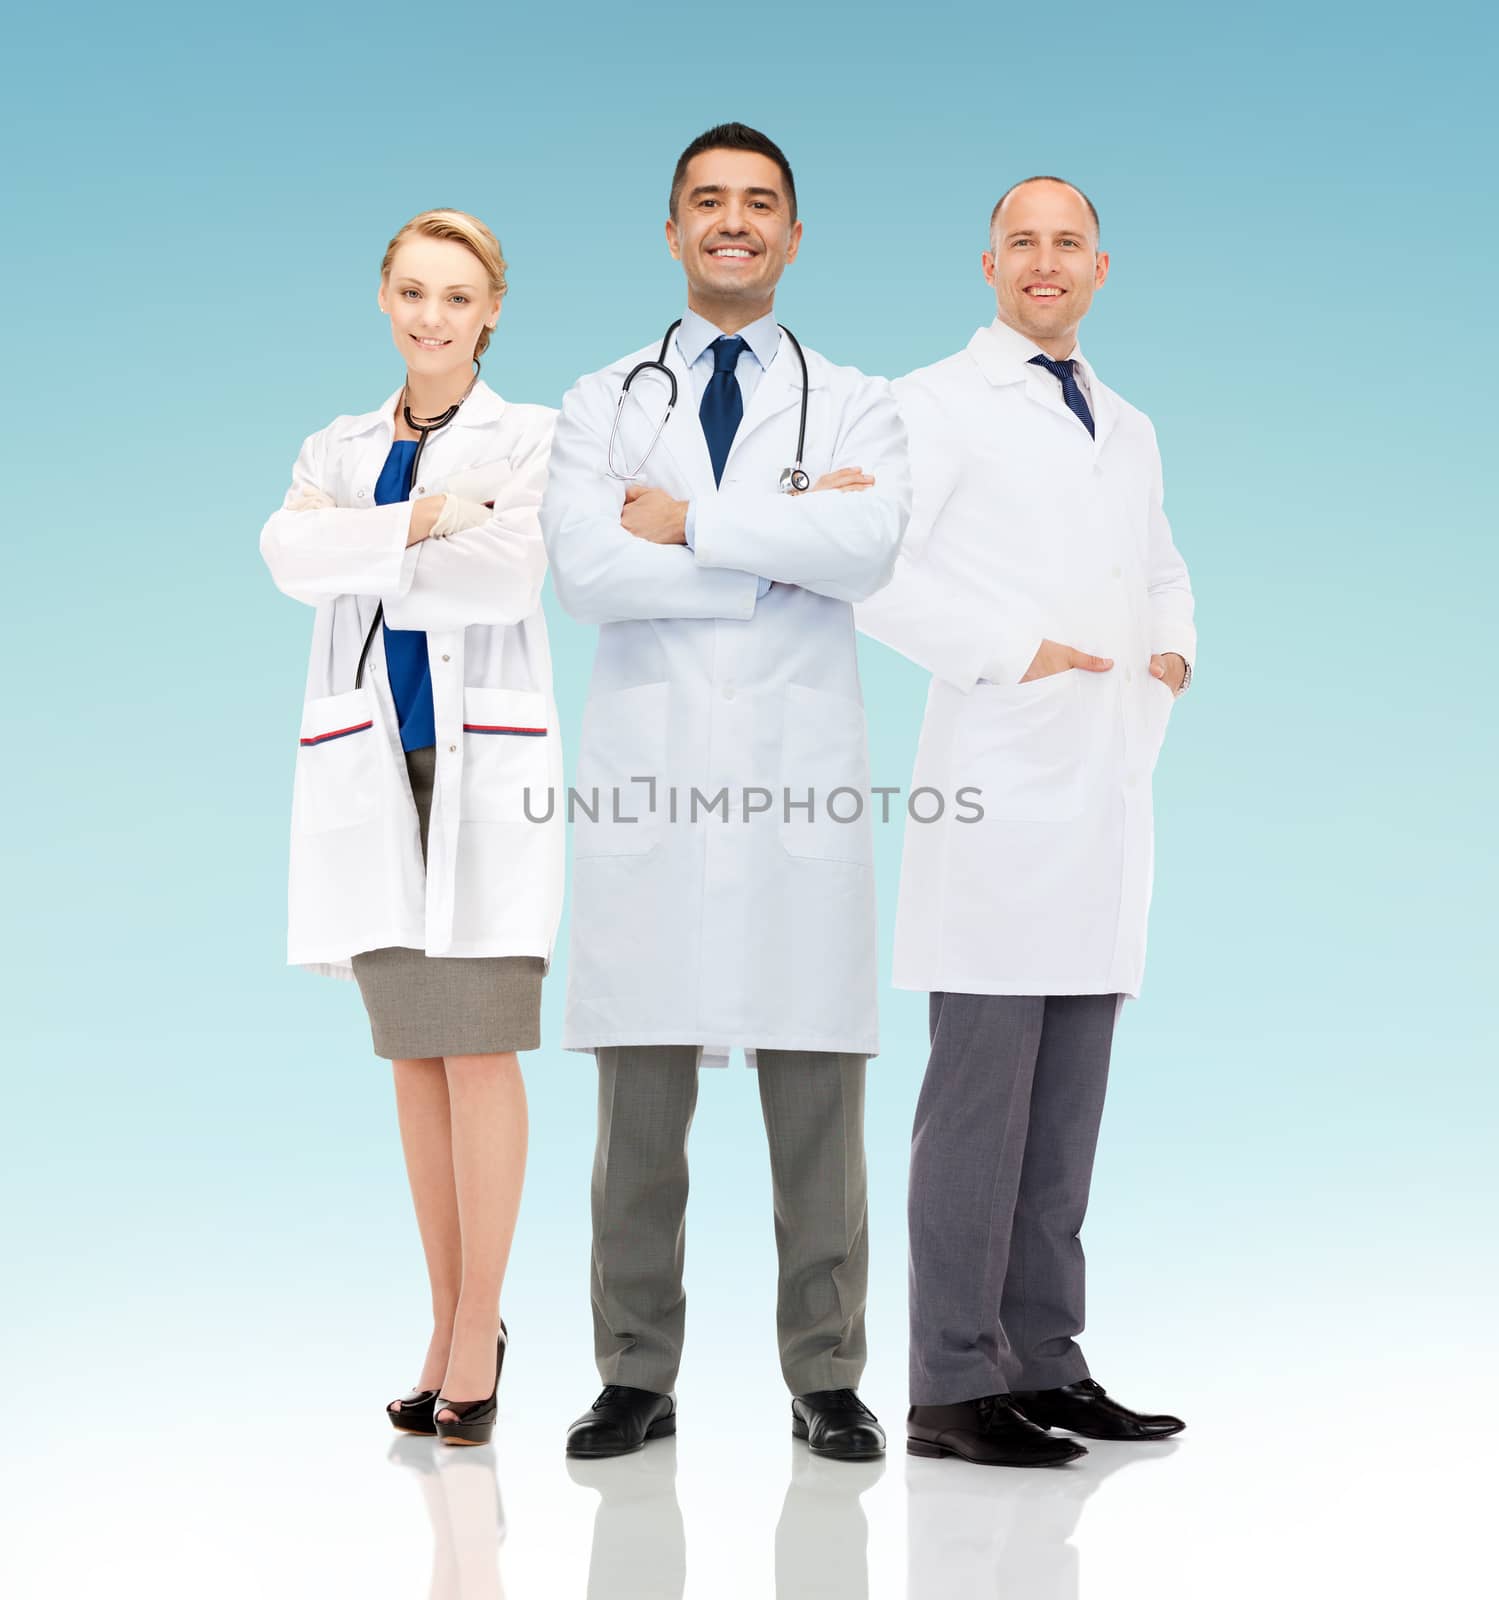 healthcare, advertisement, people and medicine concept - group of smiling doctors in white coats over blue background